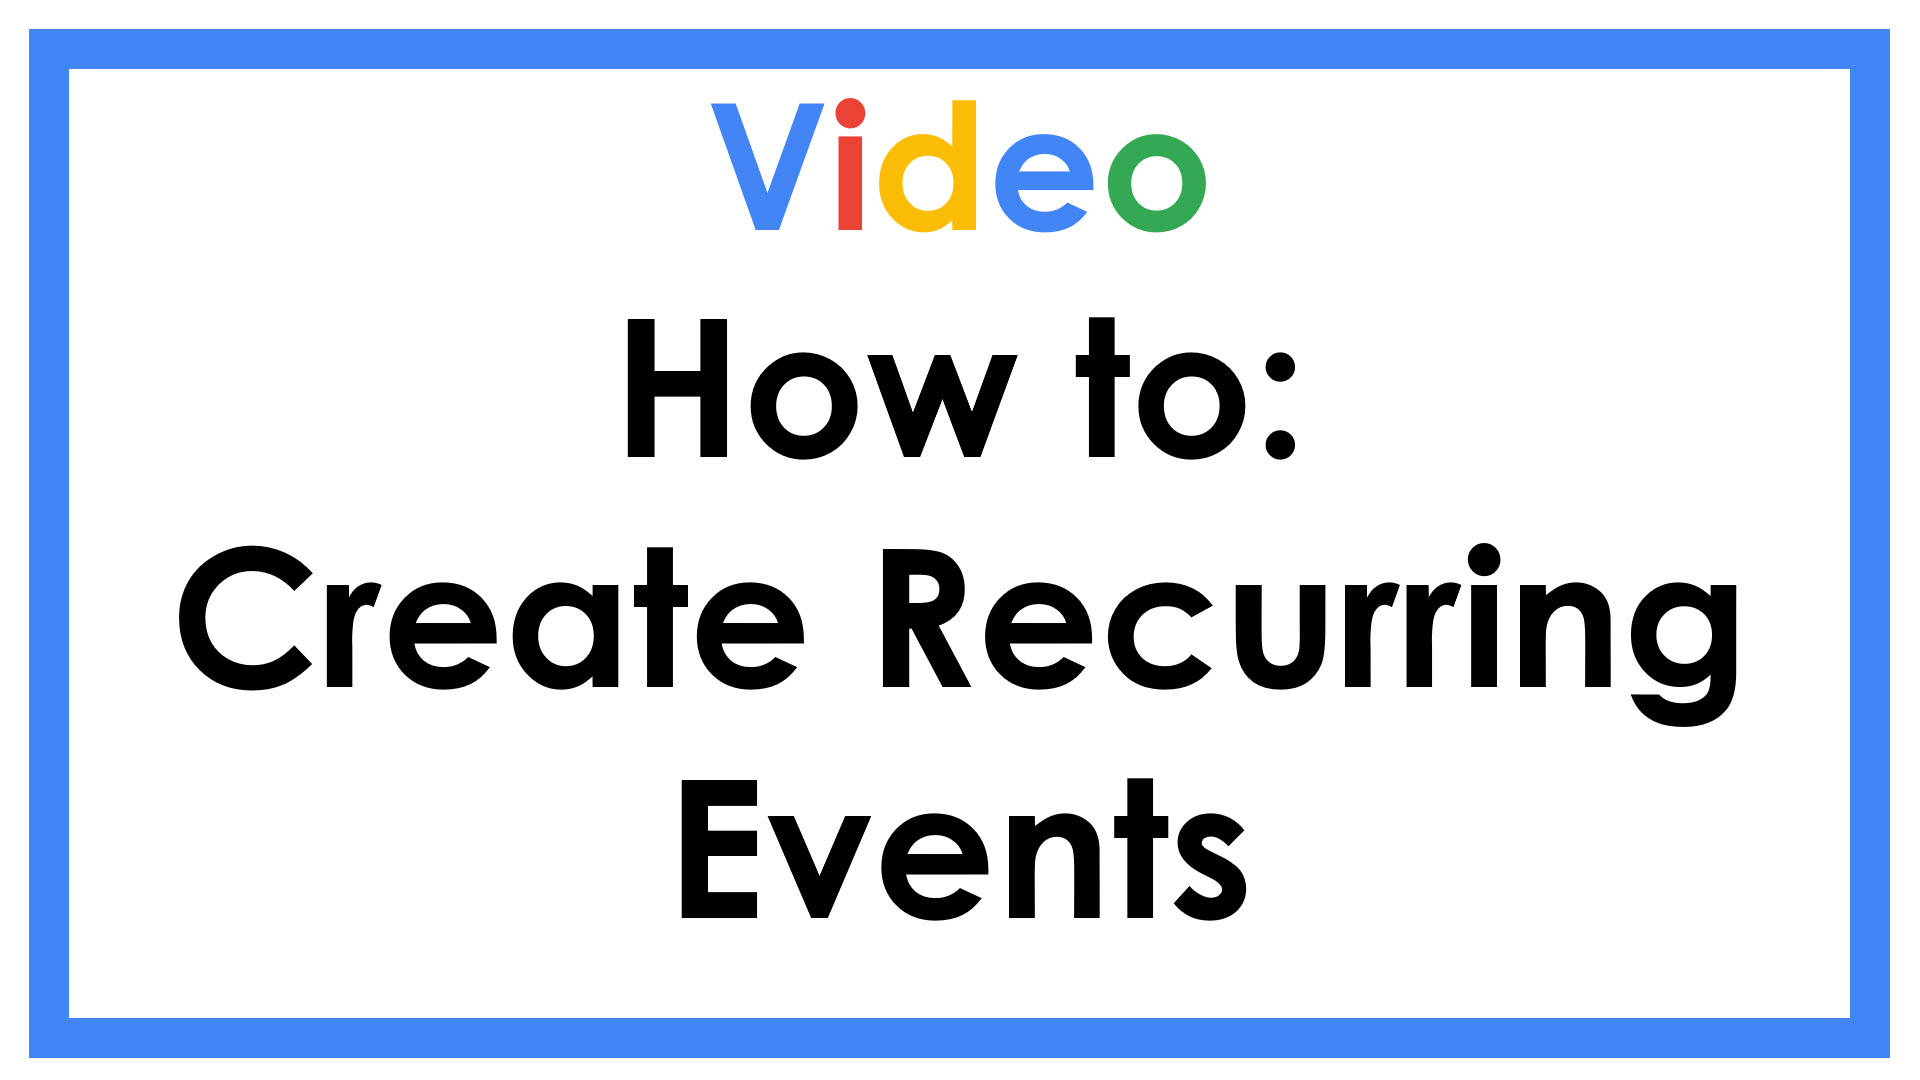 Video How to: Create Recurring Events